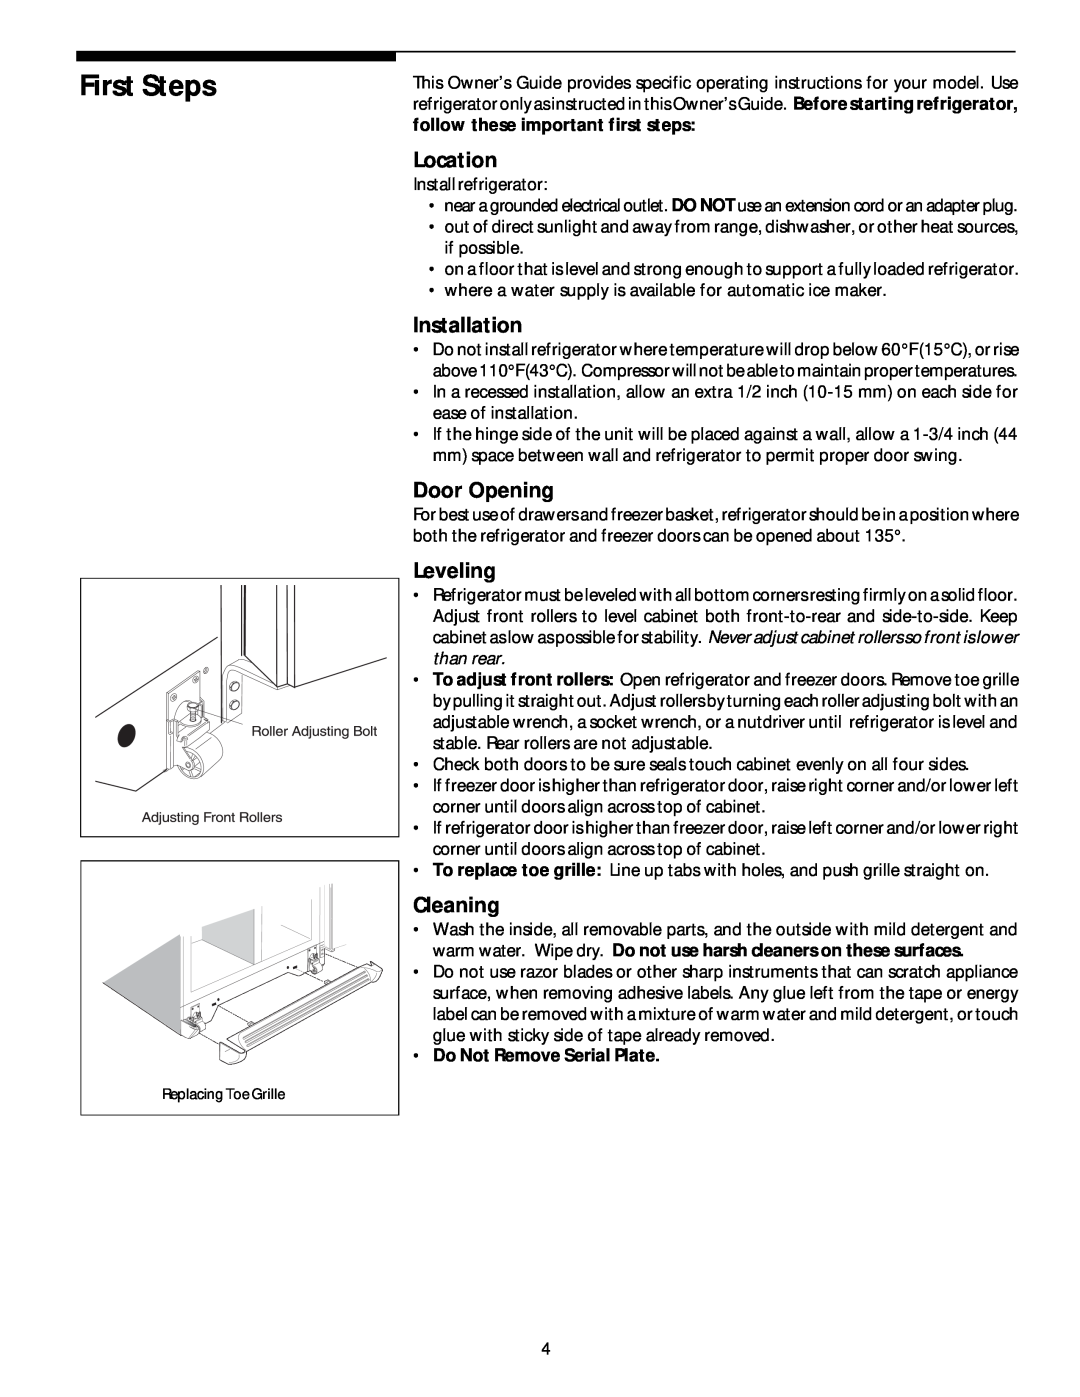 Frigidaire 218954901 manual First Steps, Location, Installation, Door Opening, Leveling, Cleaning 